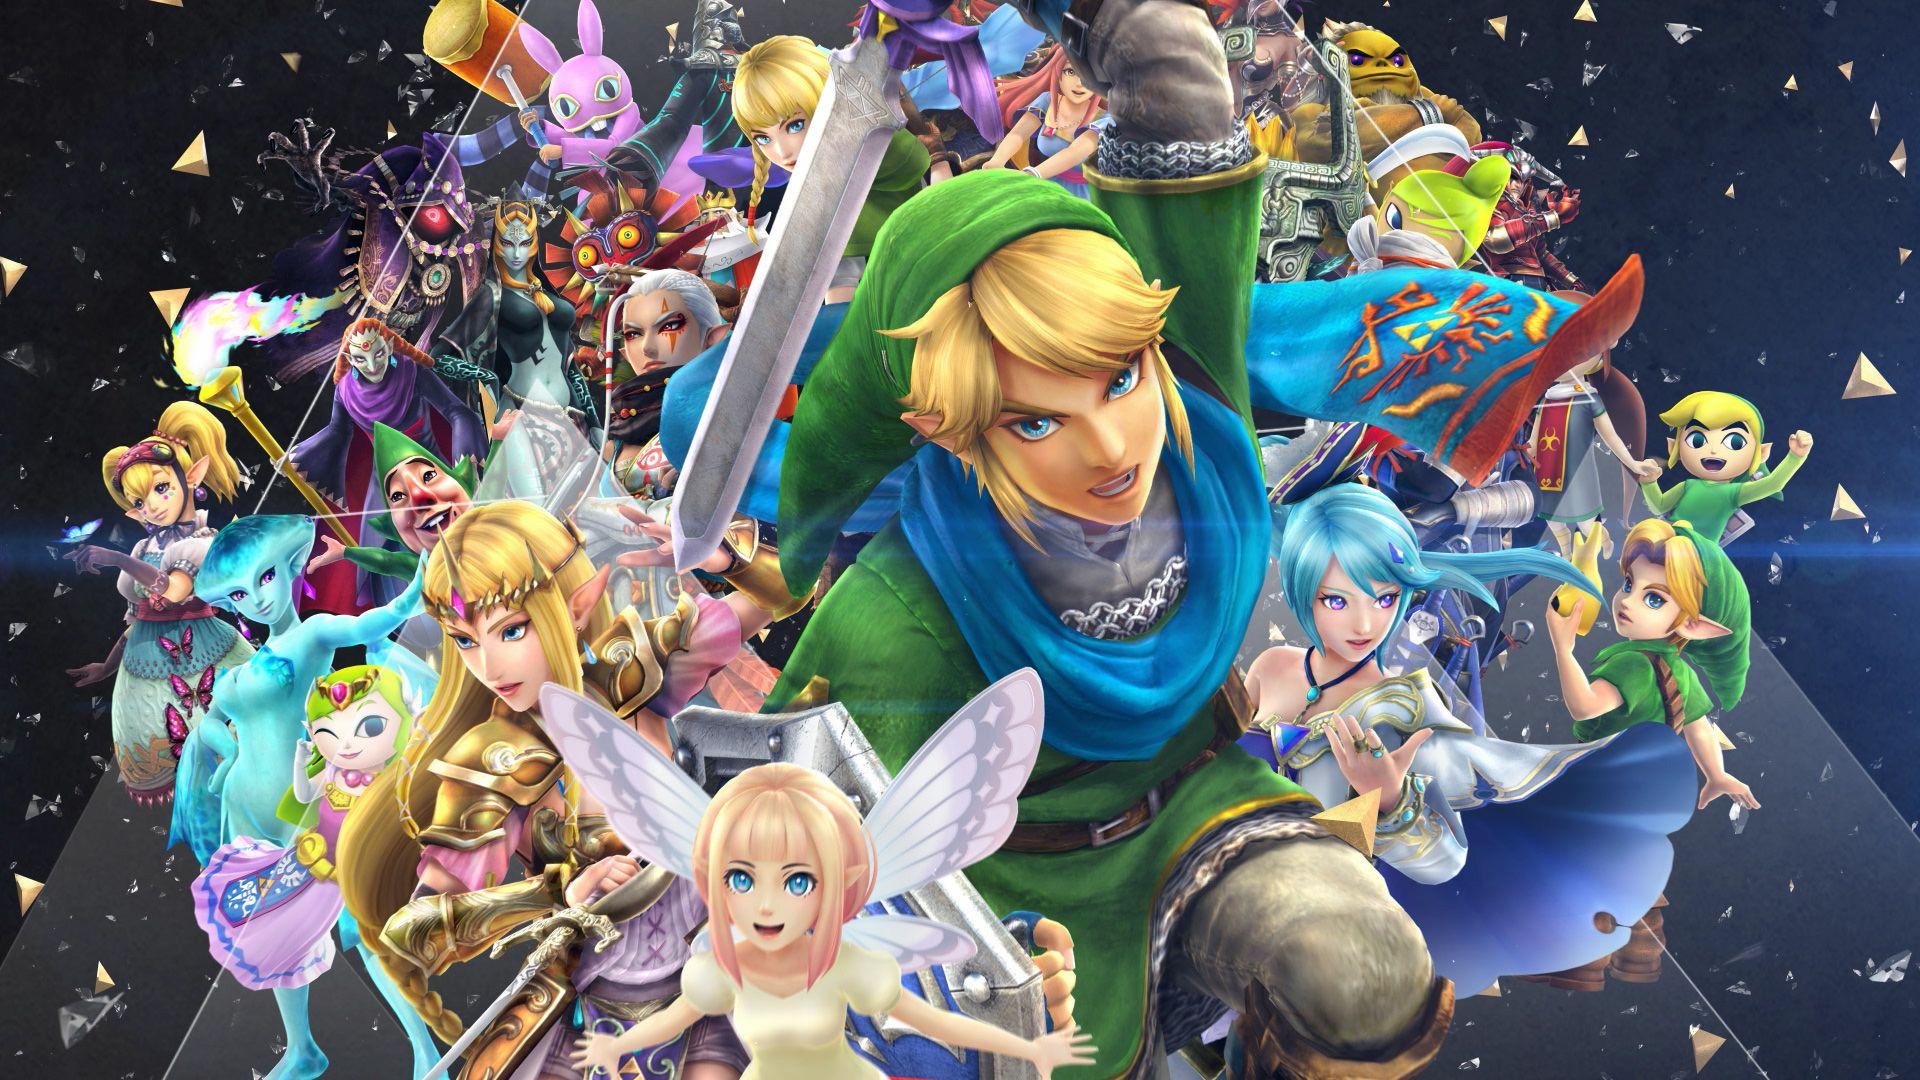 Second for Hyrule Warriors: Definitive Edition